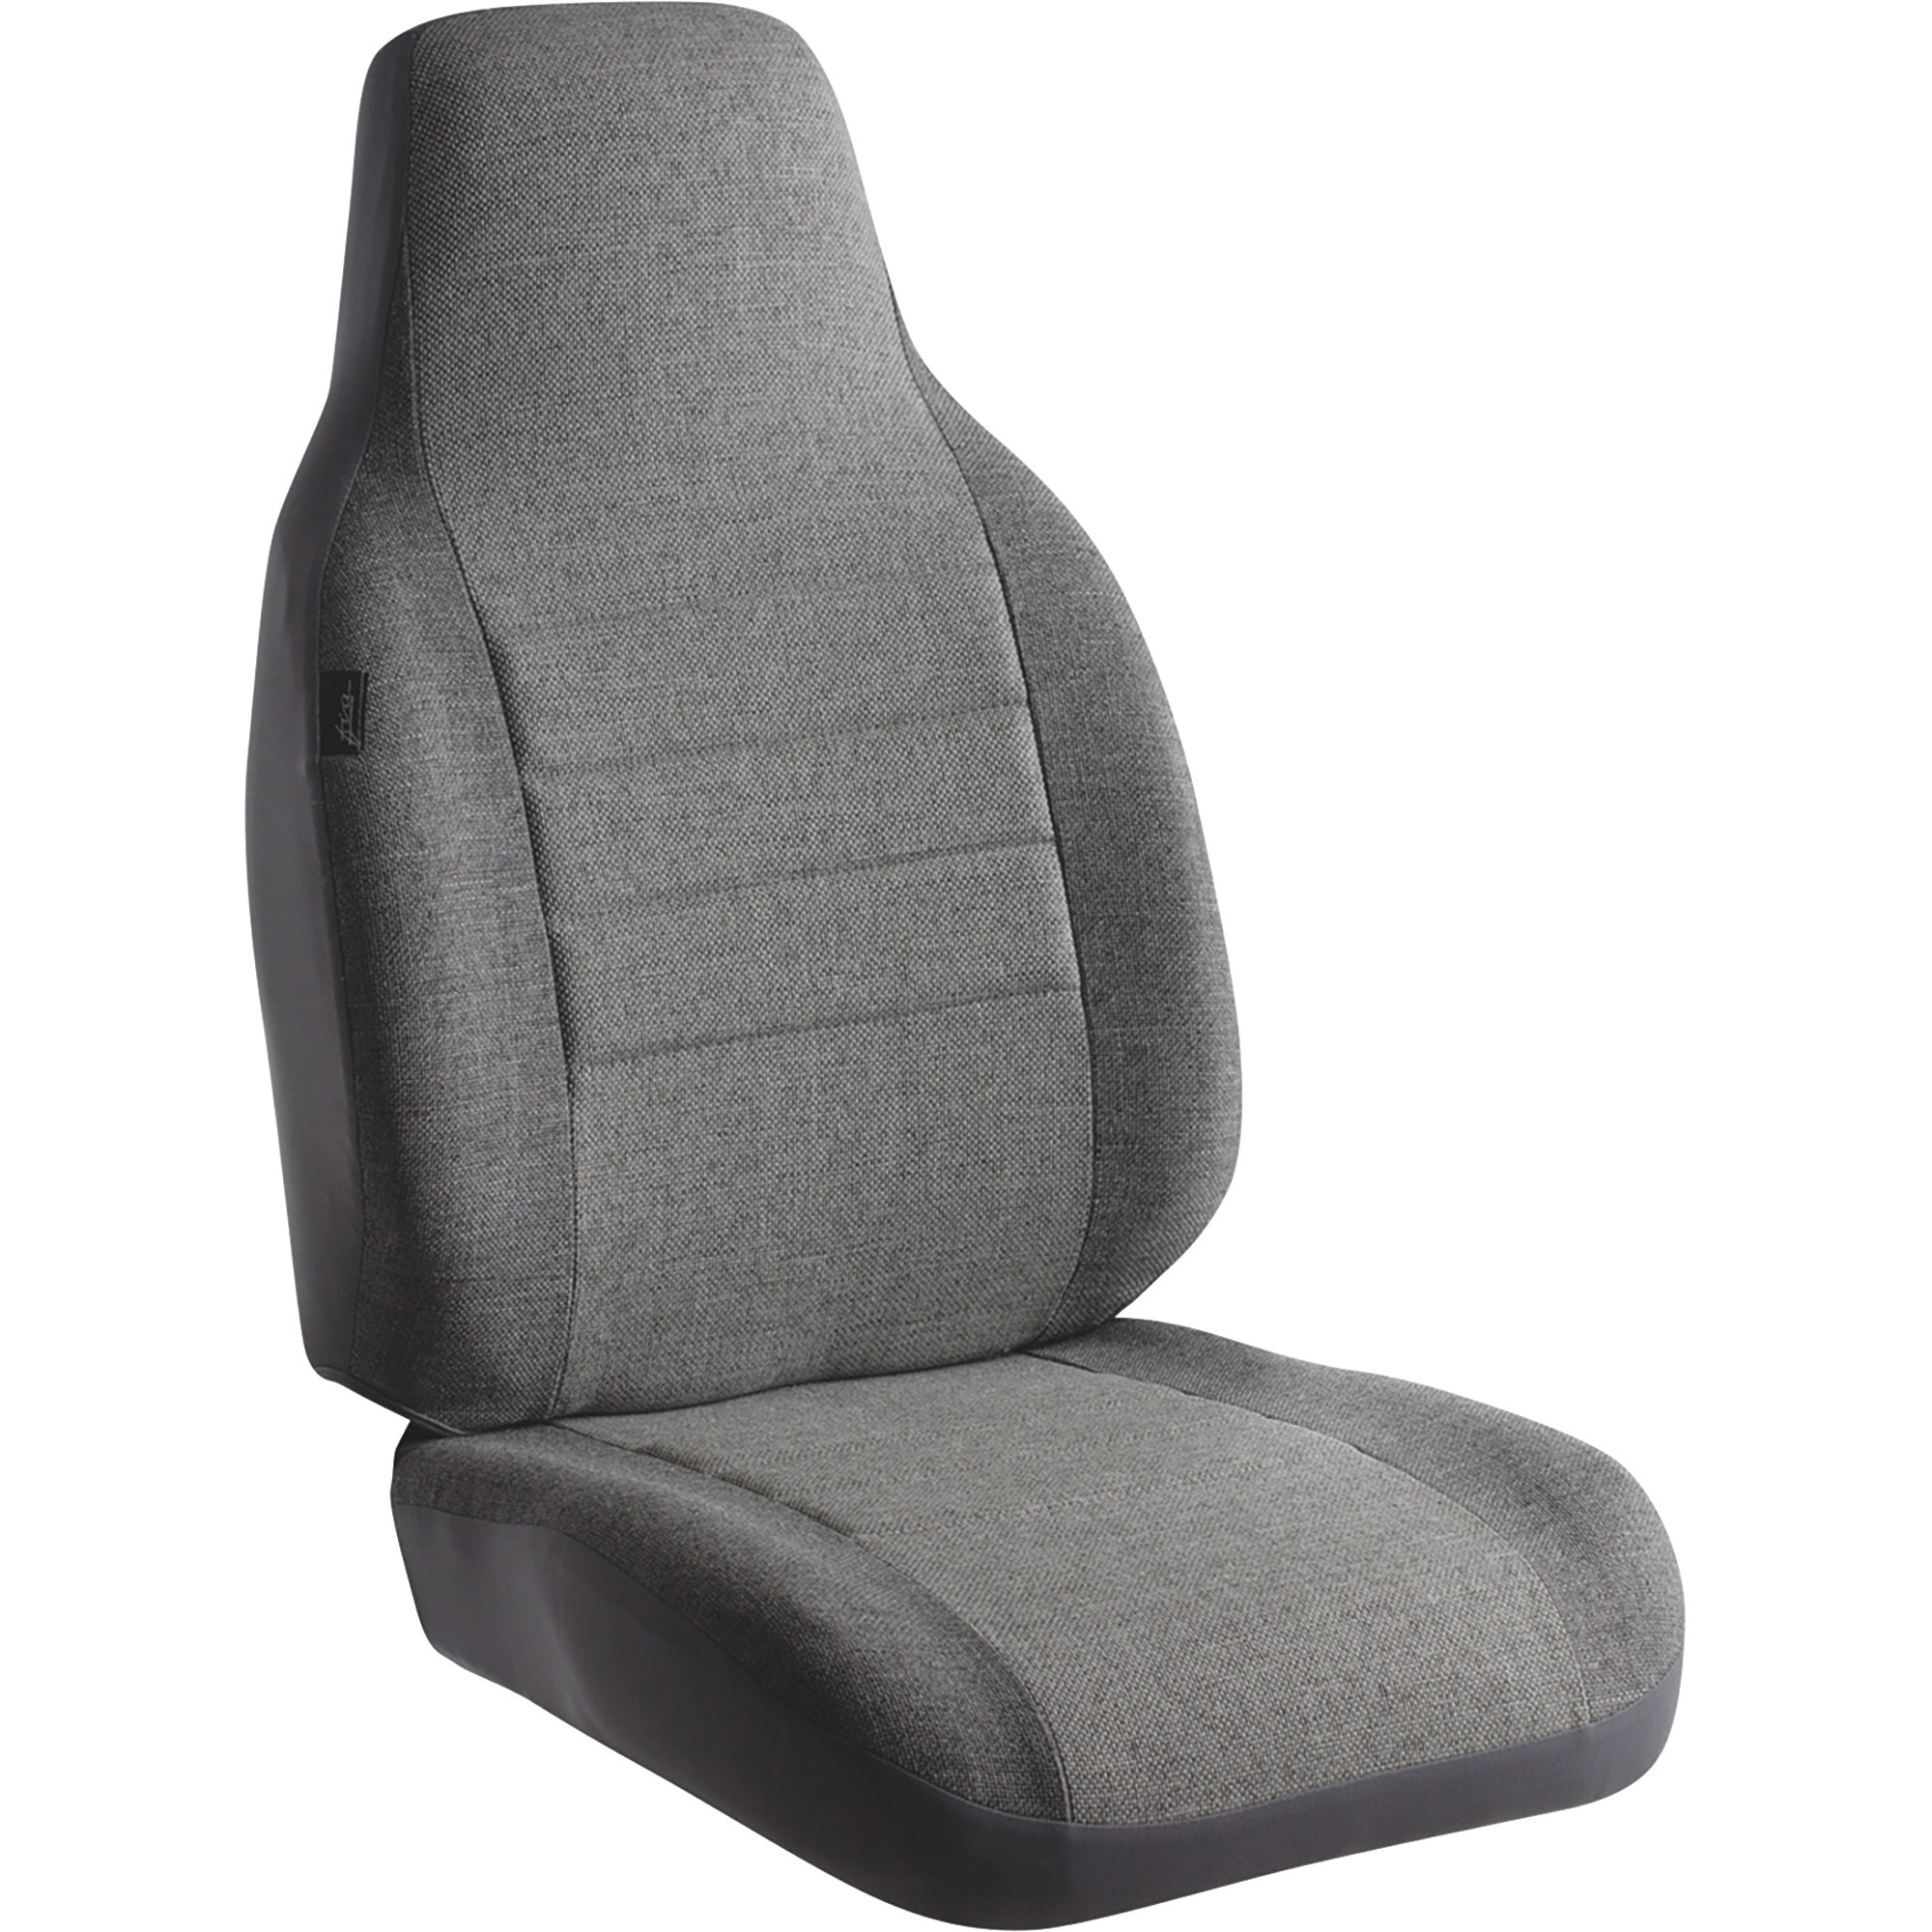 FiA Freightliner Cascadia High-Back Bucket Seat and Armrest Covers â Gray, Single Bucket, Model OE3024 GRAY